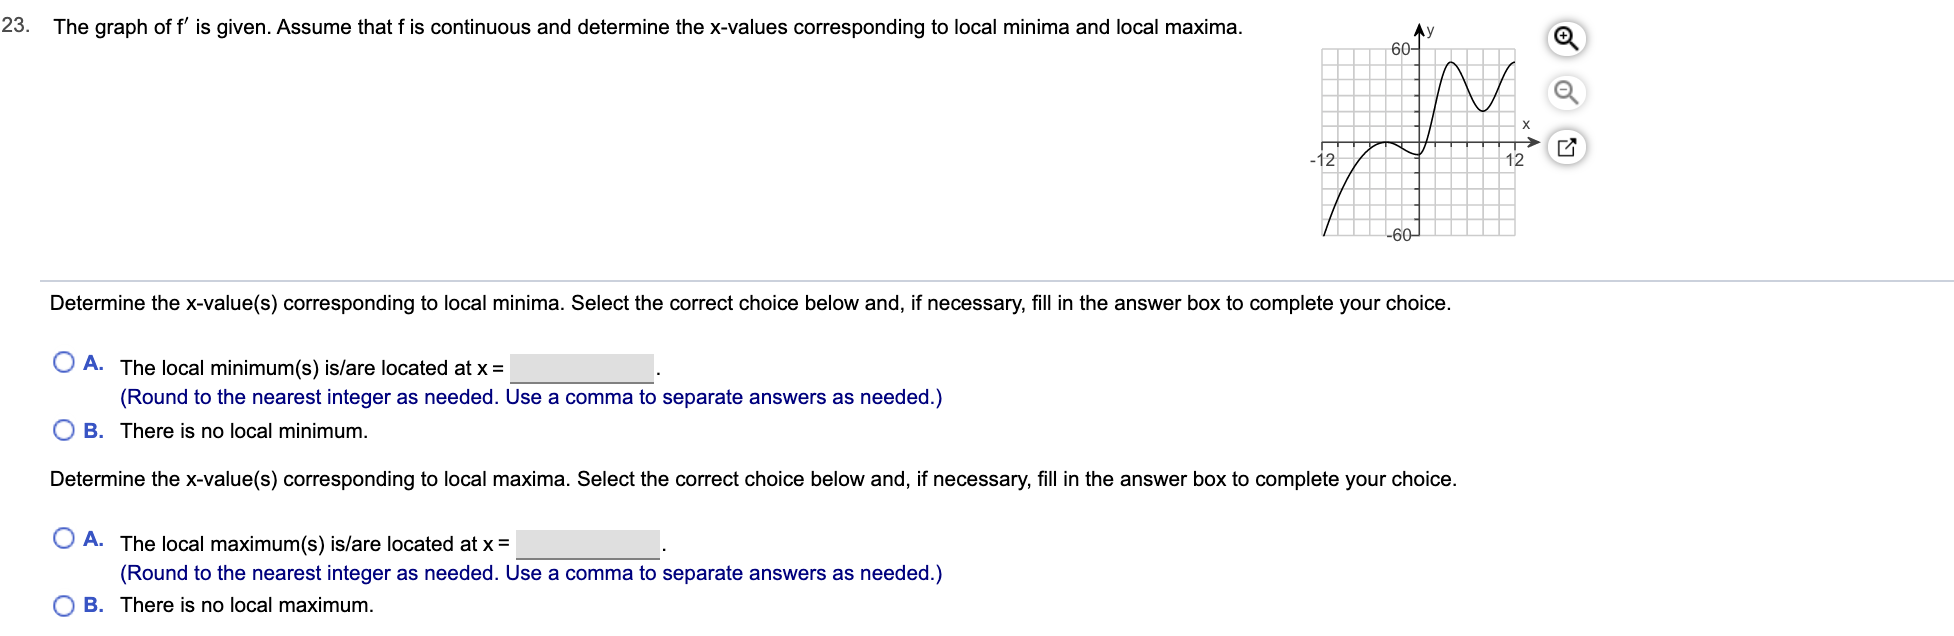 The graph of f' is given. Assume that f is continuous and determine the x-values corresponding to local minima and local maxima.
23.
Ay
60-
X
-12
12
-60
Determine the x-value(s) corresponding to local minima. Select the correct choice below and, if necessary, fill in the answer box to complete your choice.
A. The local minimum(s) is/are located at x
(Round to the nearest integer as needed. Use a comma to separate answers as needed.)
B. There is no local minimum.
Determine the x-value(s) corresponding to local maxima. Select the correct choice below and, if necessary, fill in the answer box to complete your choice.
A. The local maximum(s) is/are located at x =
(Round to the nearest integer as needed. Use a comma to separate answers as needed.)
O B. There is no local maximum.
